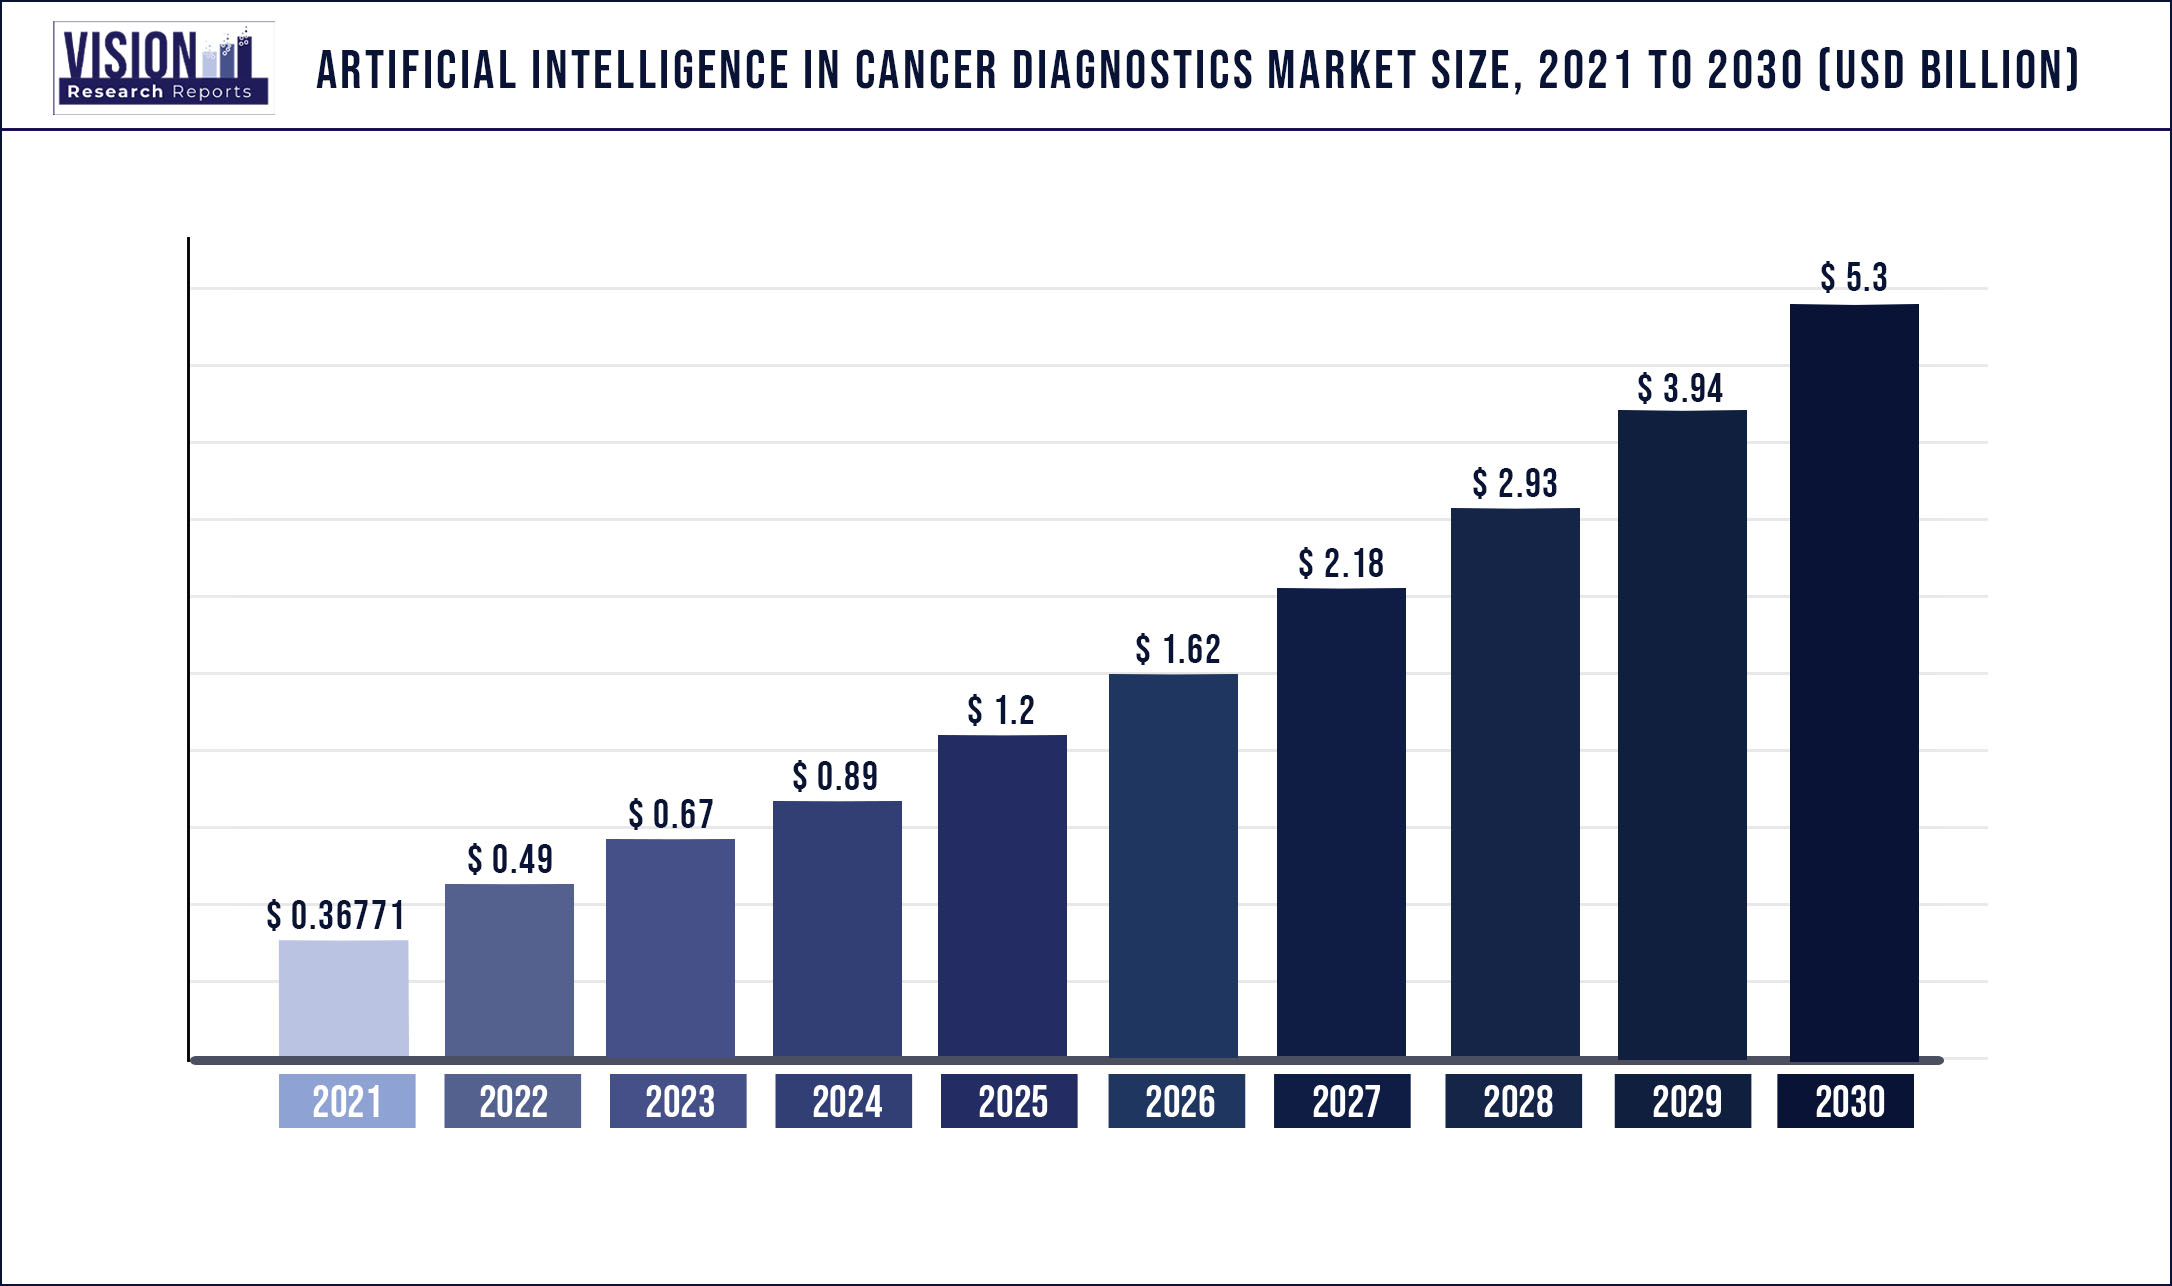 Artificial Intelligence in Cancer Diagnostics Market Size 2021 to 2030